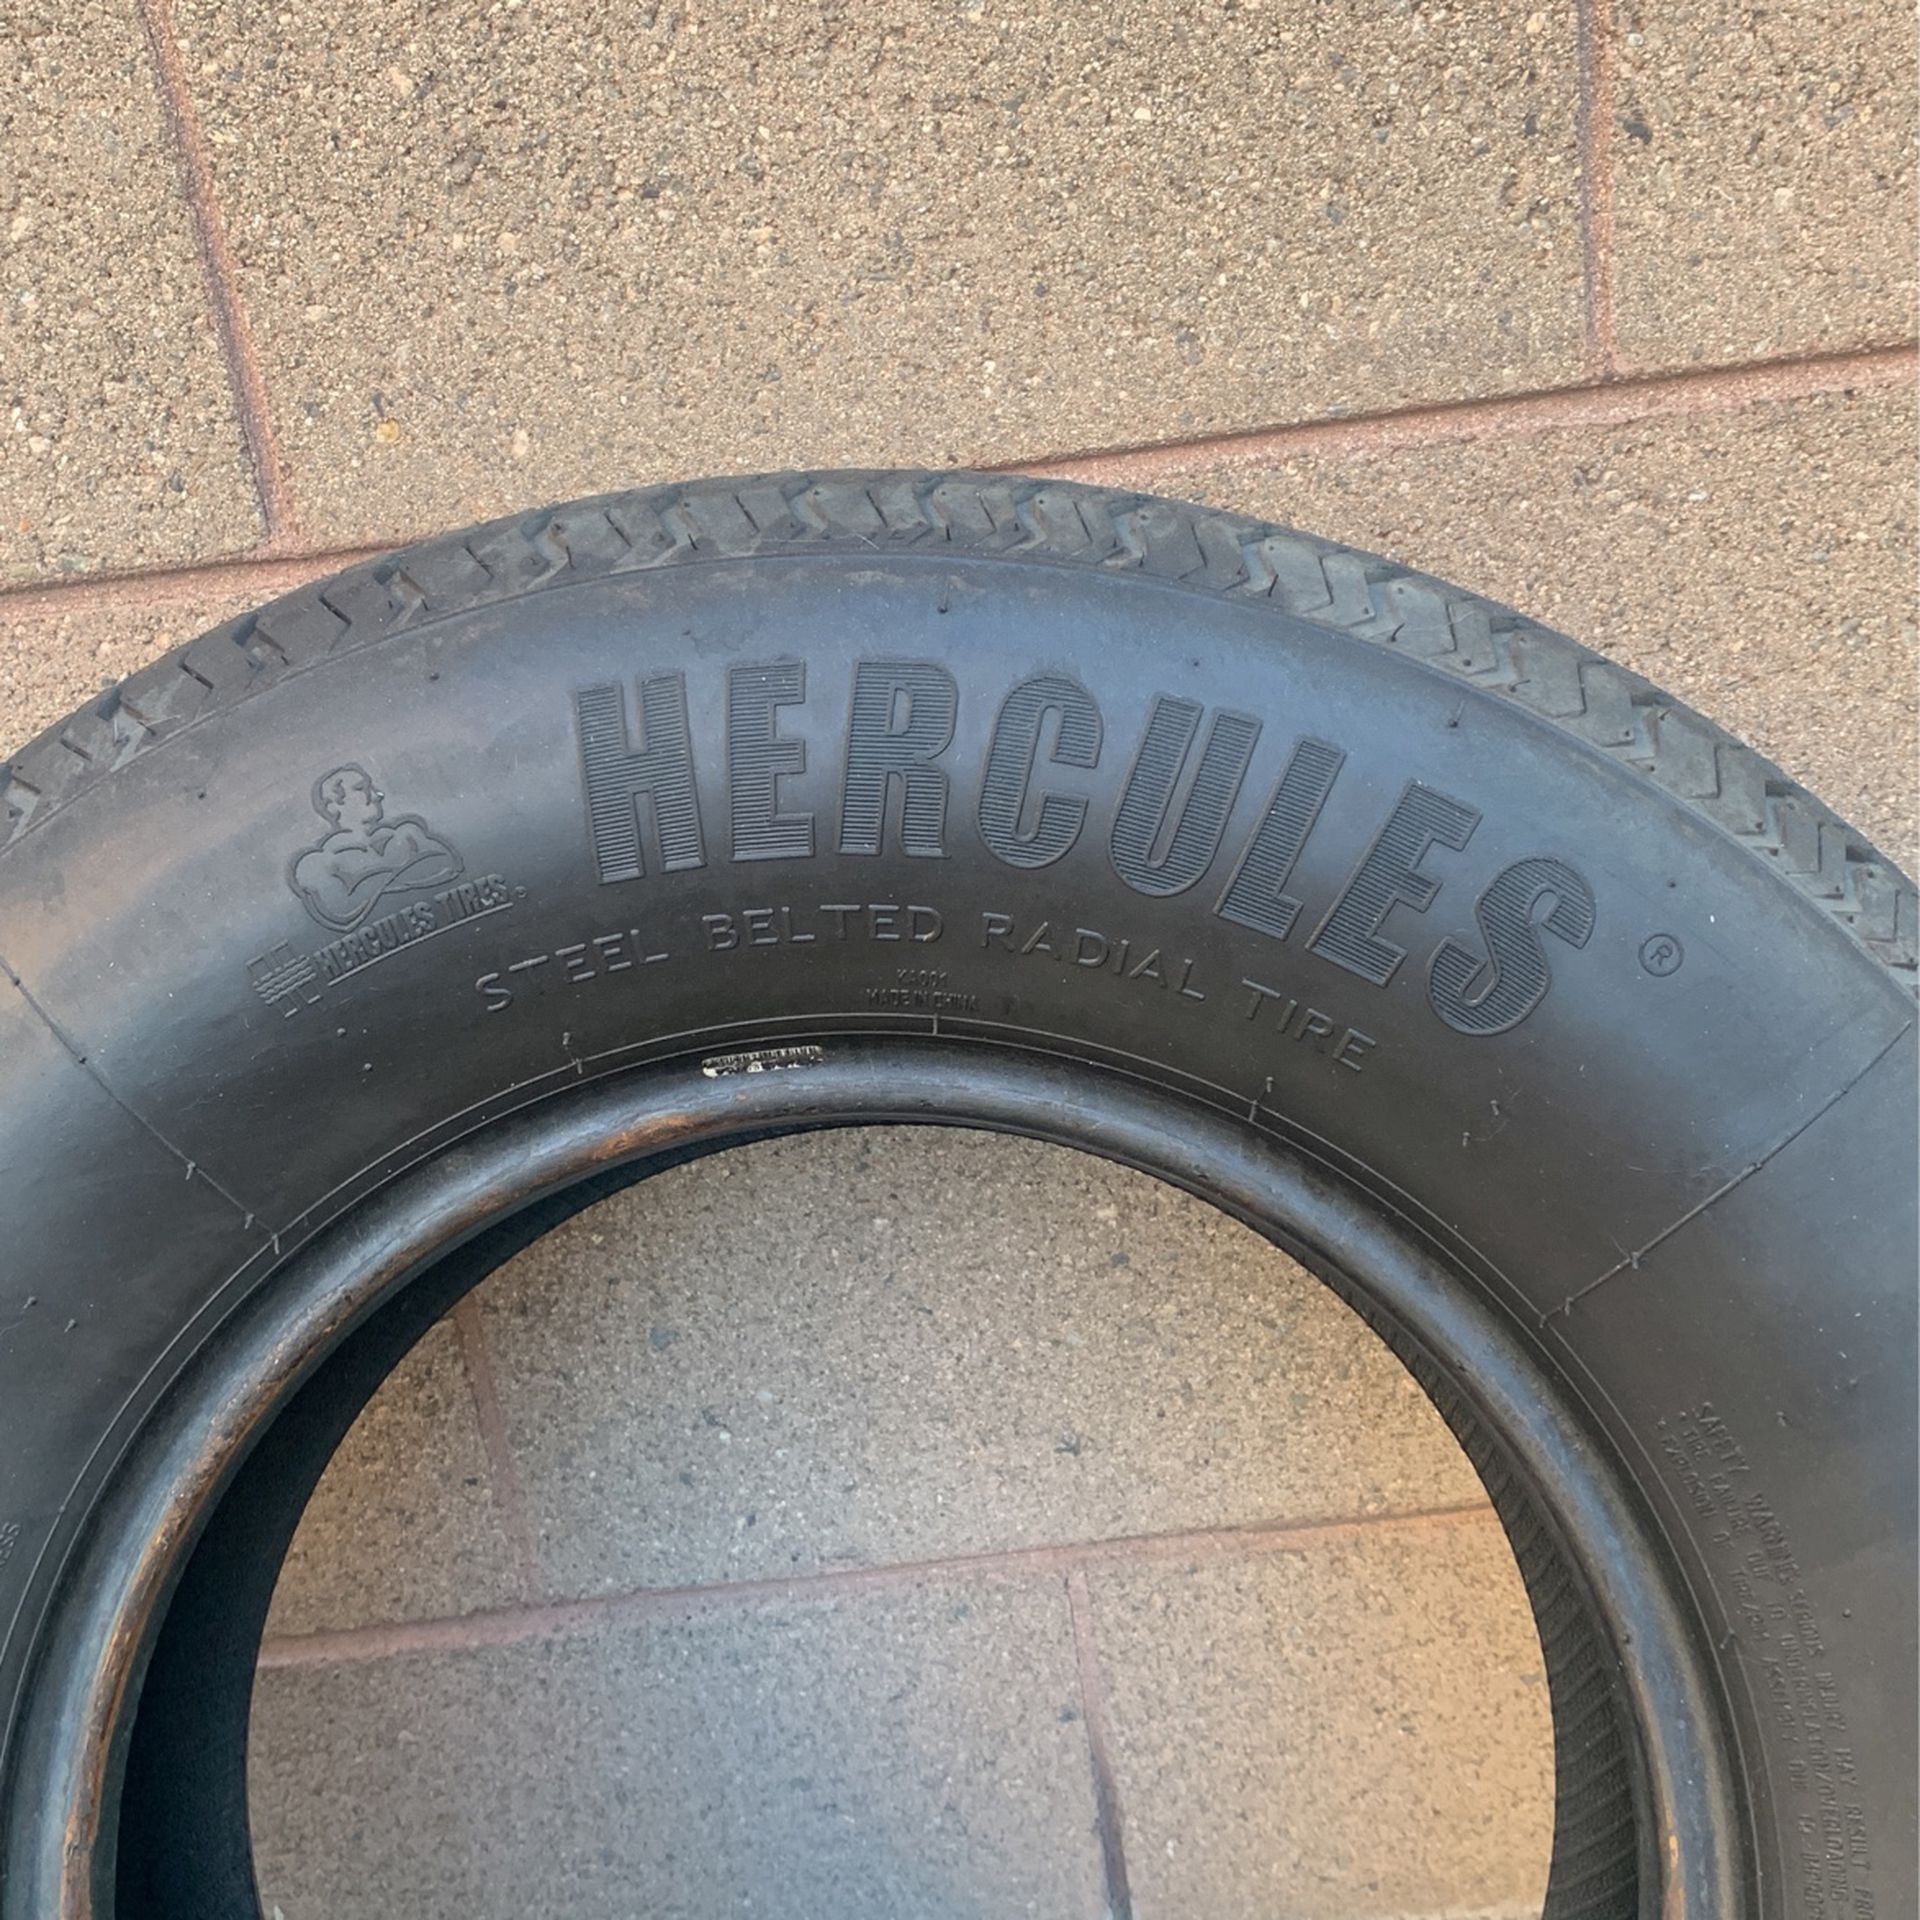 Hercules Trailer Tires / 2 Tires For $50 Size 225/75/15